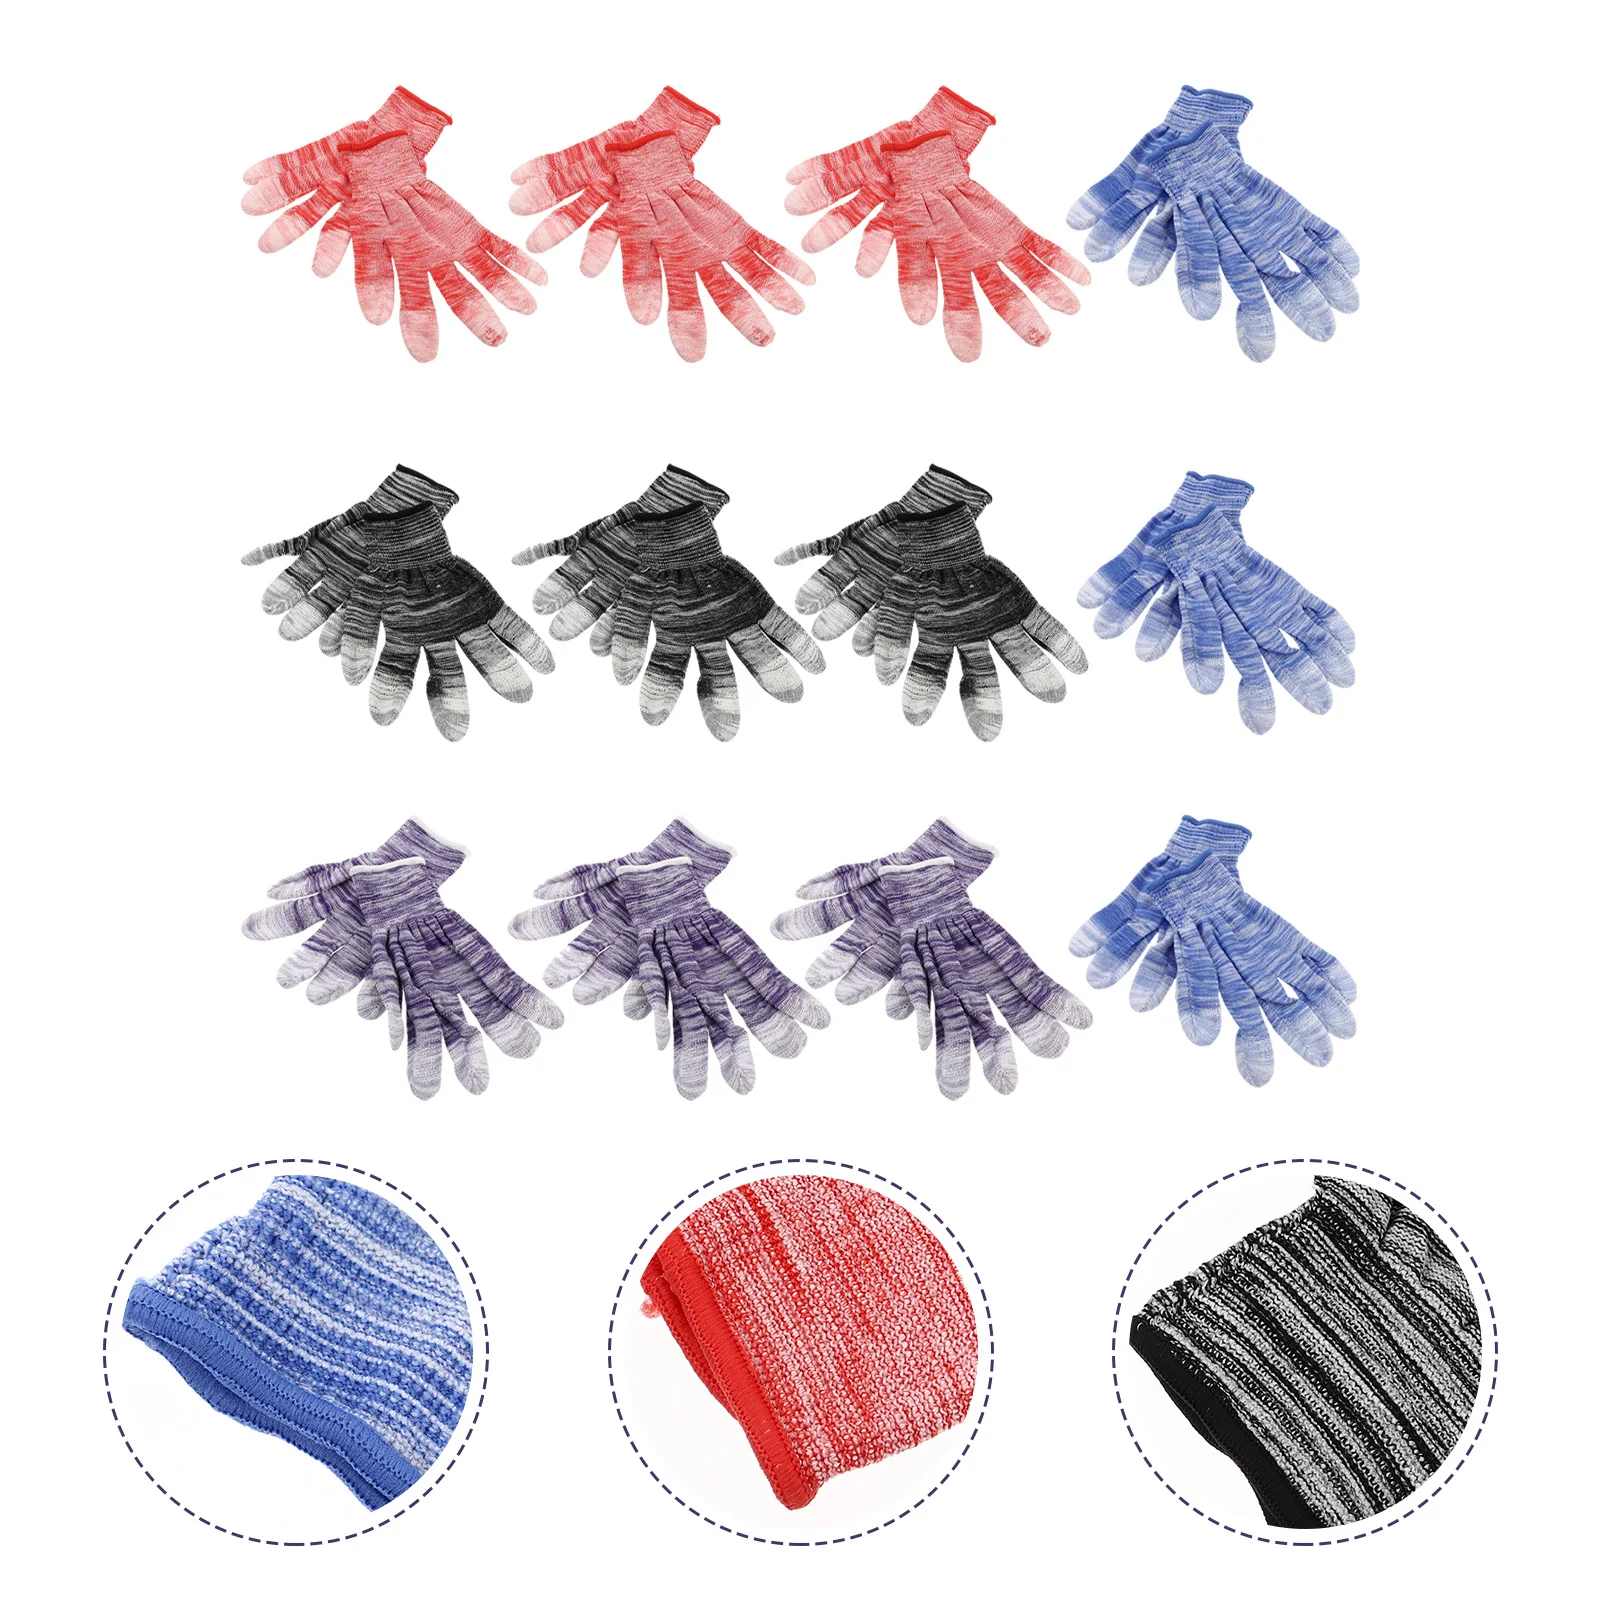 

12 Pairs Painted Finger Sewing Anti Static Anti Static Work Gloves Protective Work Anti Static Non-skid Mitten Labor Protection